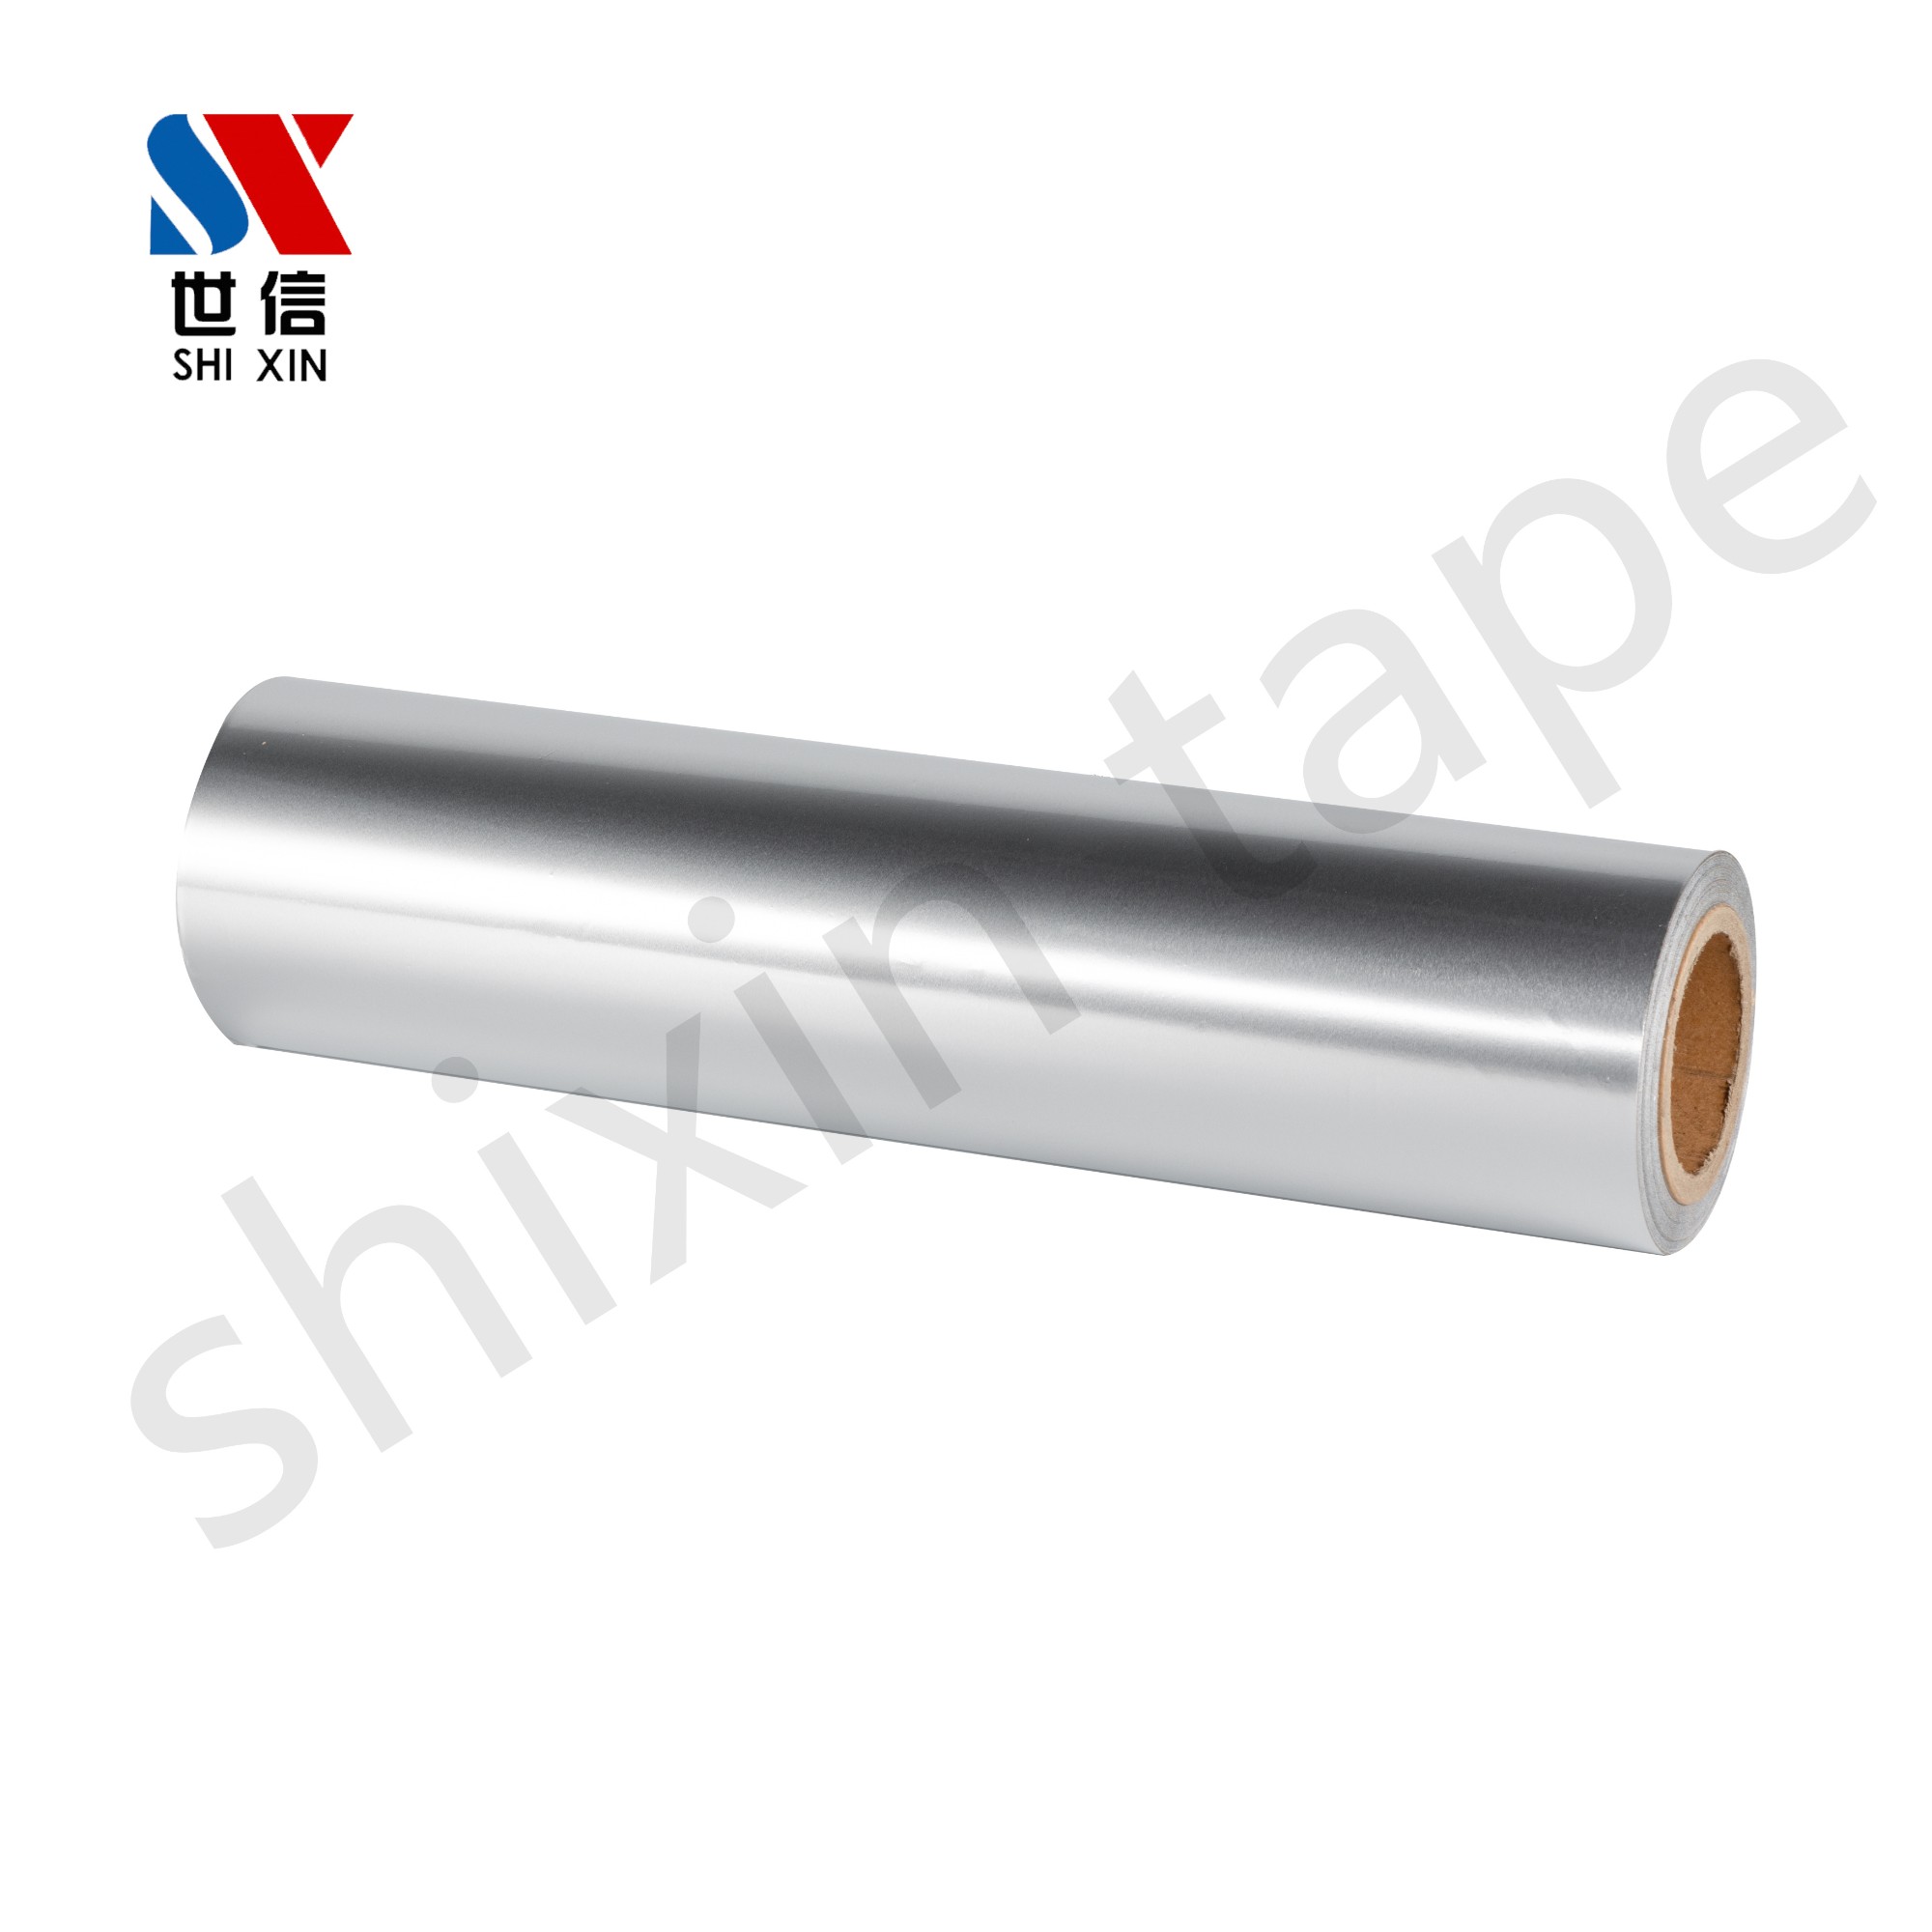 Heat seal aluminum foil tape without release film